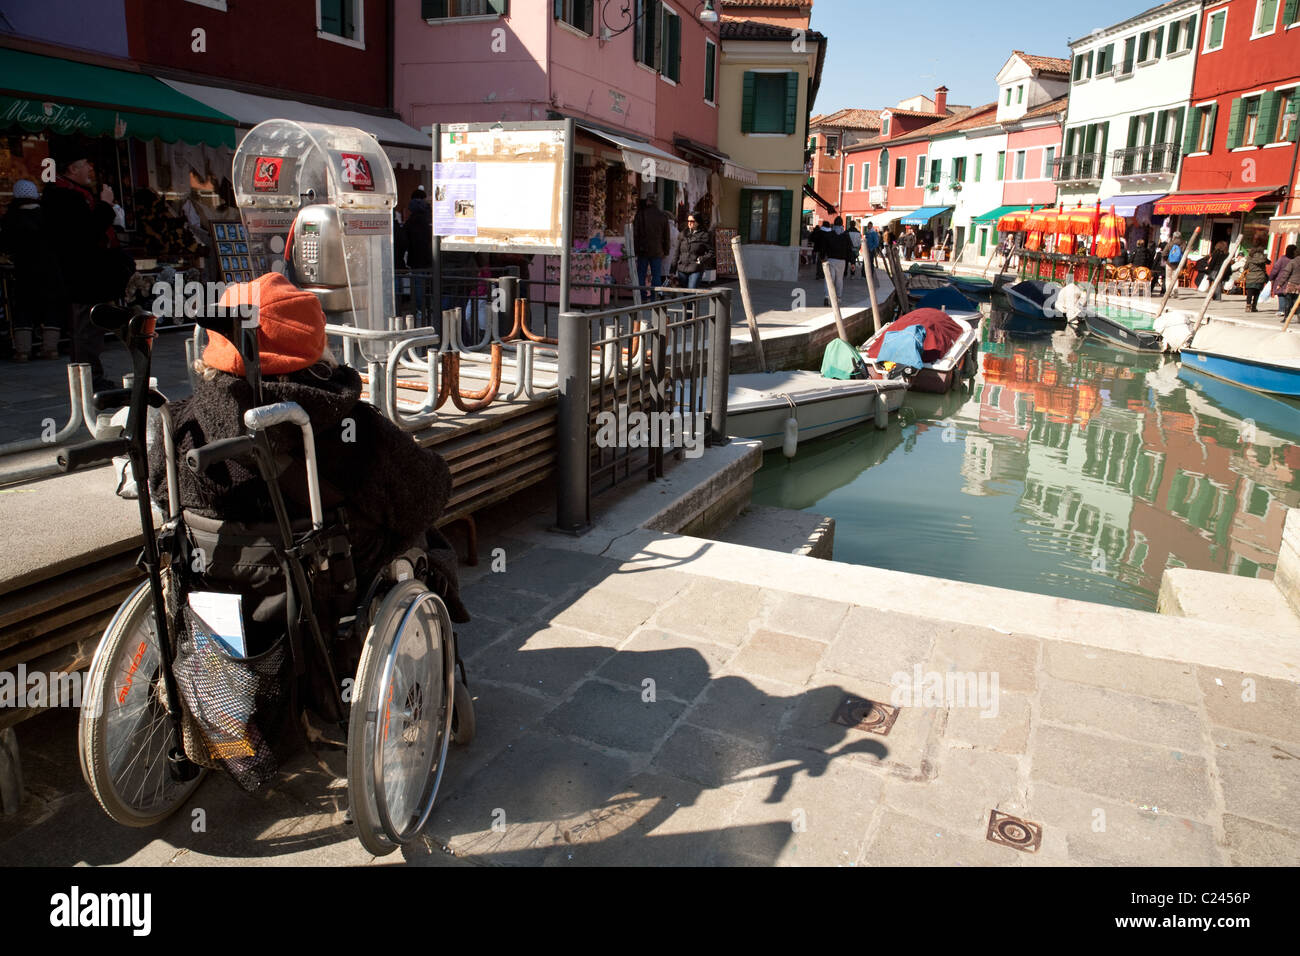 A disabled woman in a wheelchair by the canal enjoying the sunshine in Burano village, Venice, Italy Stock Photo